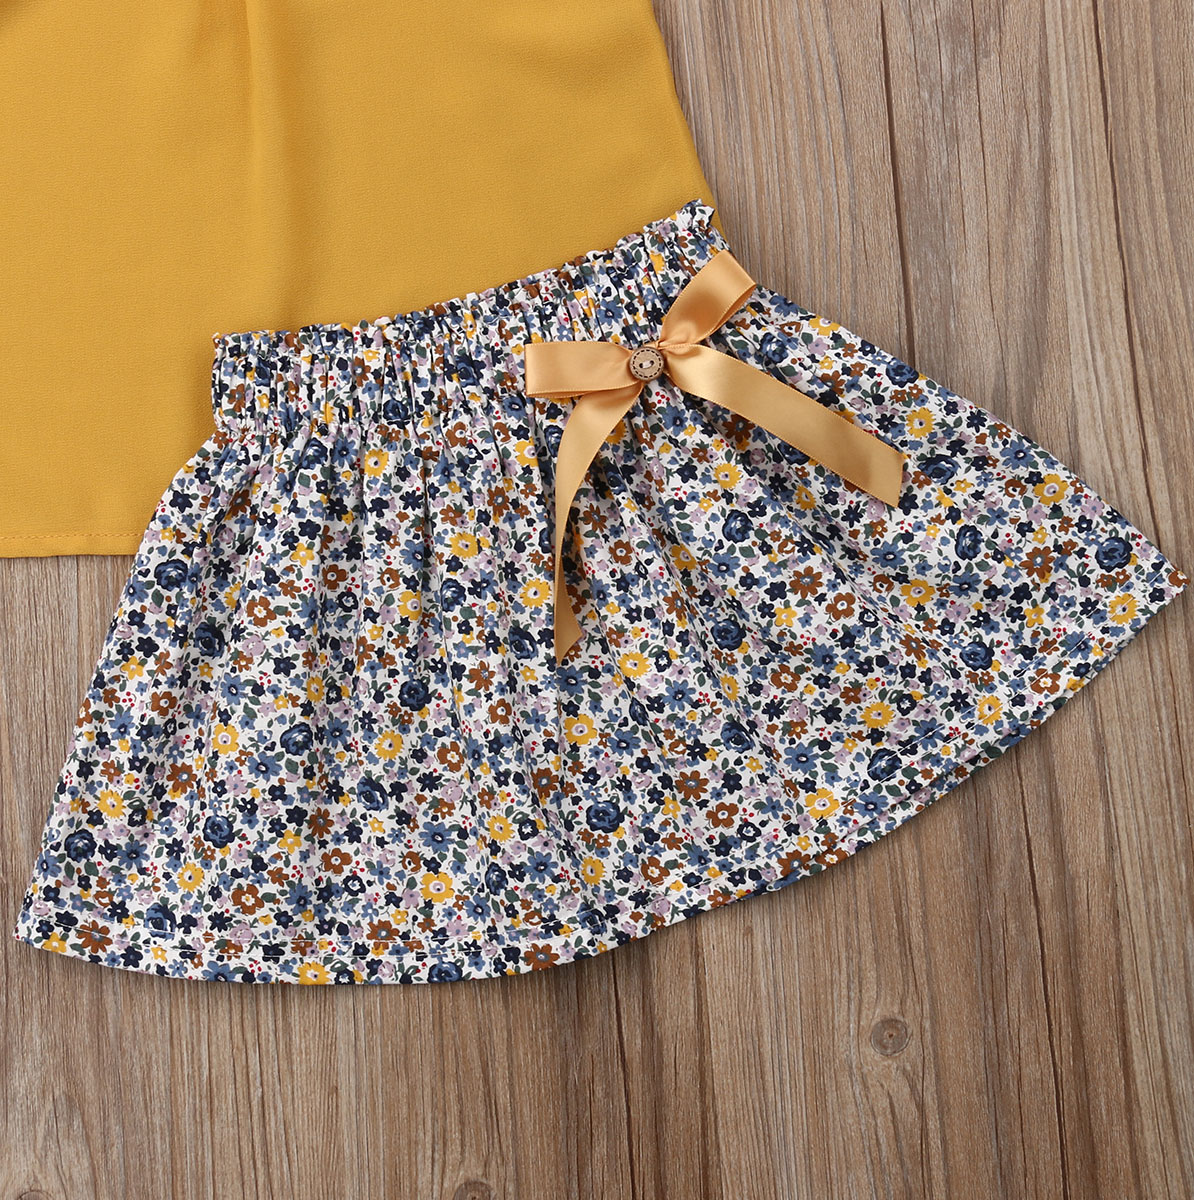 2019 Children Summer Clothing 1-5Y Toddler Kid Baby Girl Clothes Sets Yellow Chiffon Tops+Floral A-Line Skirt Outfits Clothes